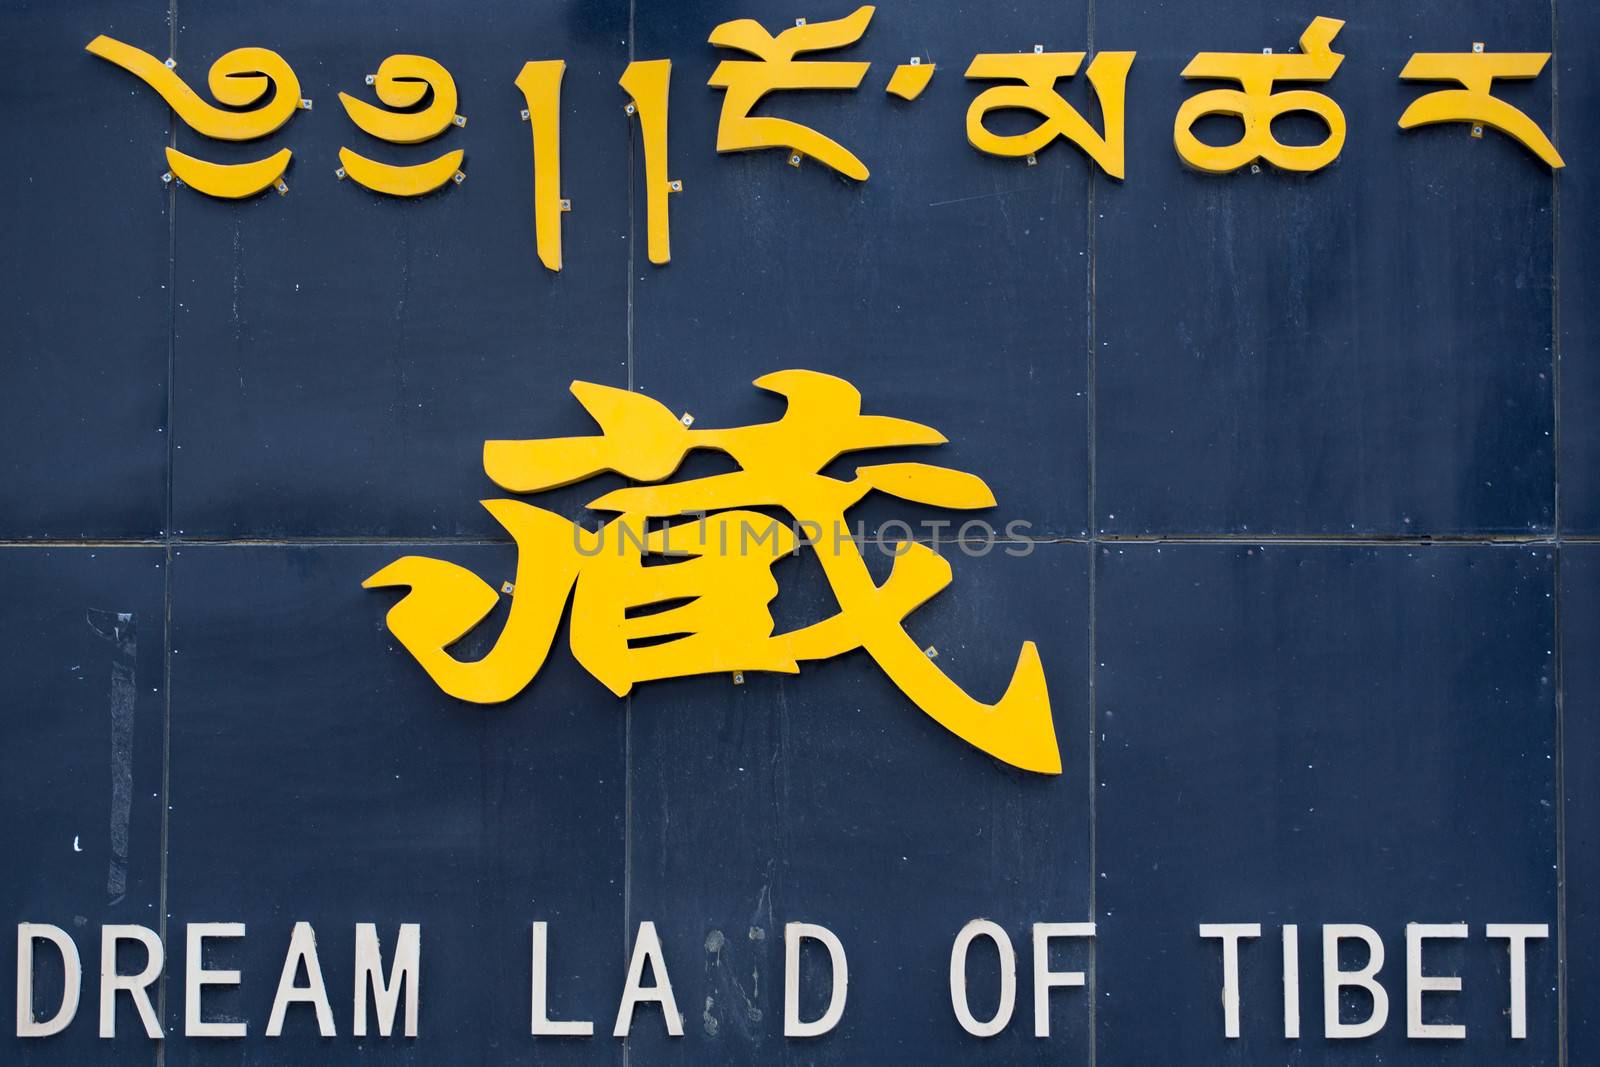 A broken sign saying: Dreamland of tibet in three languages, Tibetan, Chinese and English. Different letters are missing in the English version. Lhasa, Tibet.